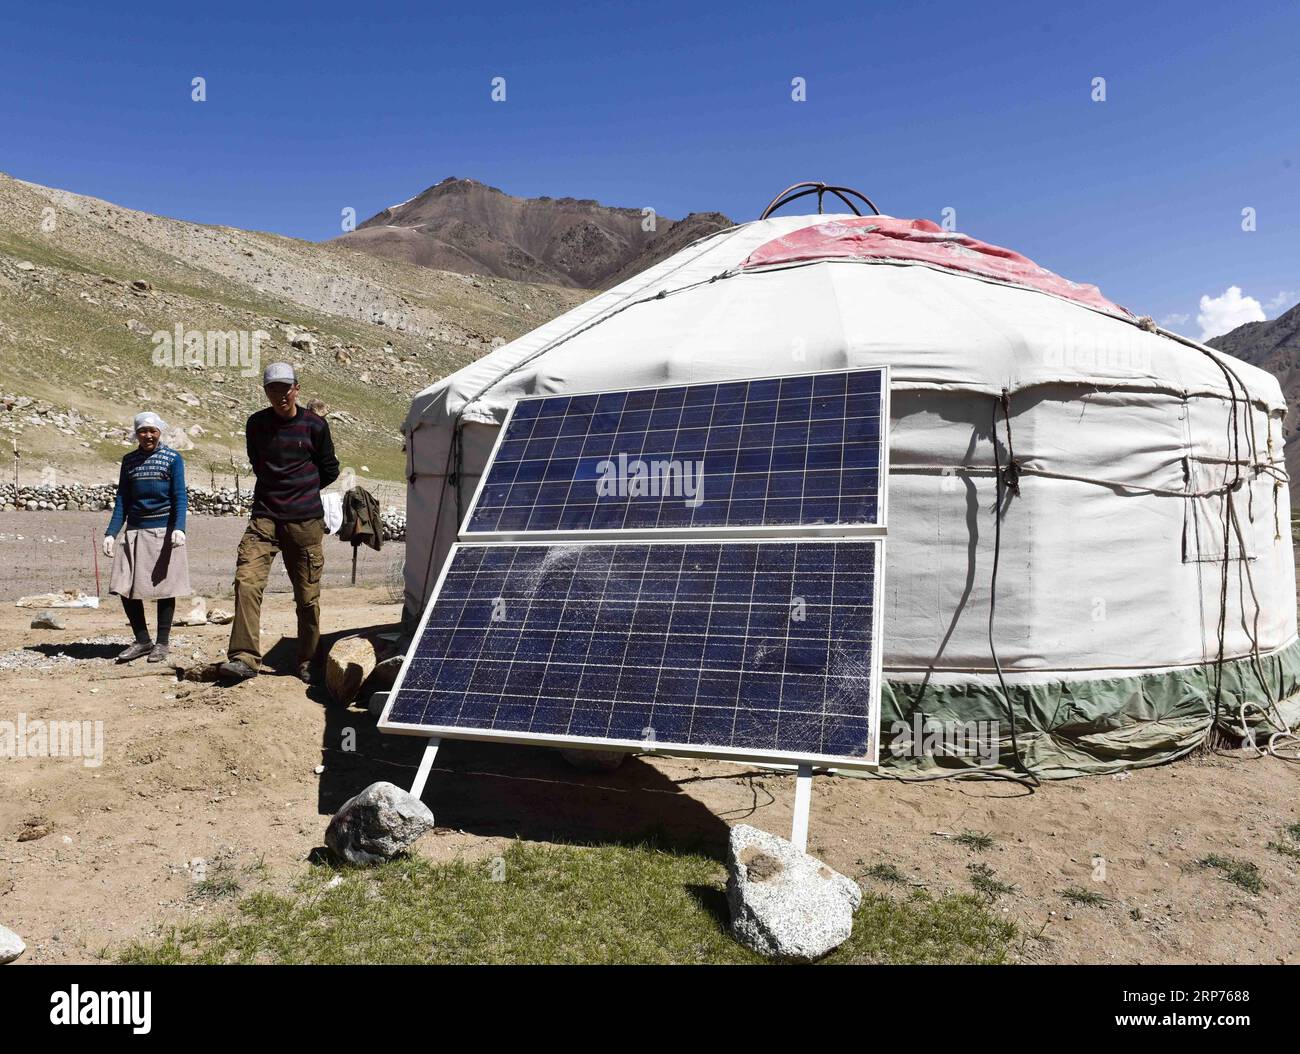 (190129) -- BEIJING, Jan. 29, 2019 (Xinhua) -- A set of solar panels are set up for power supply to the yurt, a movable home for nomads inside the Wakhan Corridor in northwest China s Xinjiang Uygur Autonomous Region, June 6, 2016. New energy power generation saw double digit growth last year in northwest China s Xinjiang Uygur Autonomous Region amid efforts to reduce coal consumption to improve the energy mix. Wind and solar power generation rose 15.2 percent and 13.6 percent to 36 billion kwh and 11.7 billion kwh respectively, according to the regional development and reform commission. It s Stock Photo